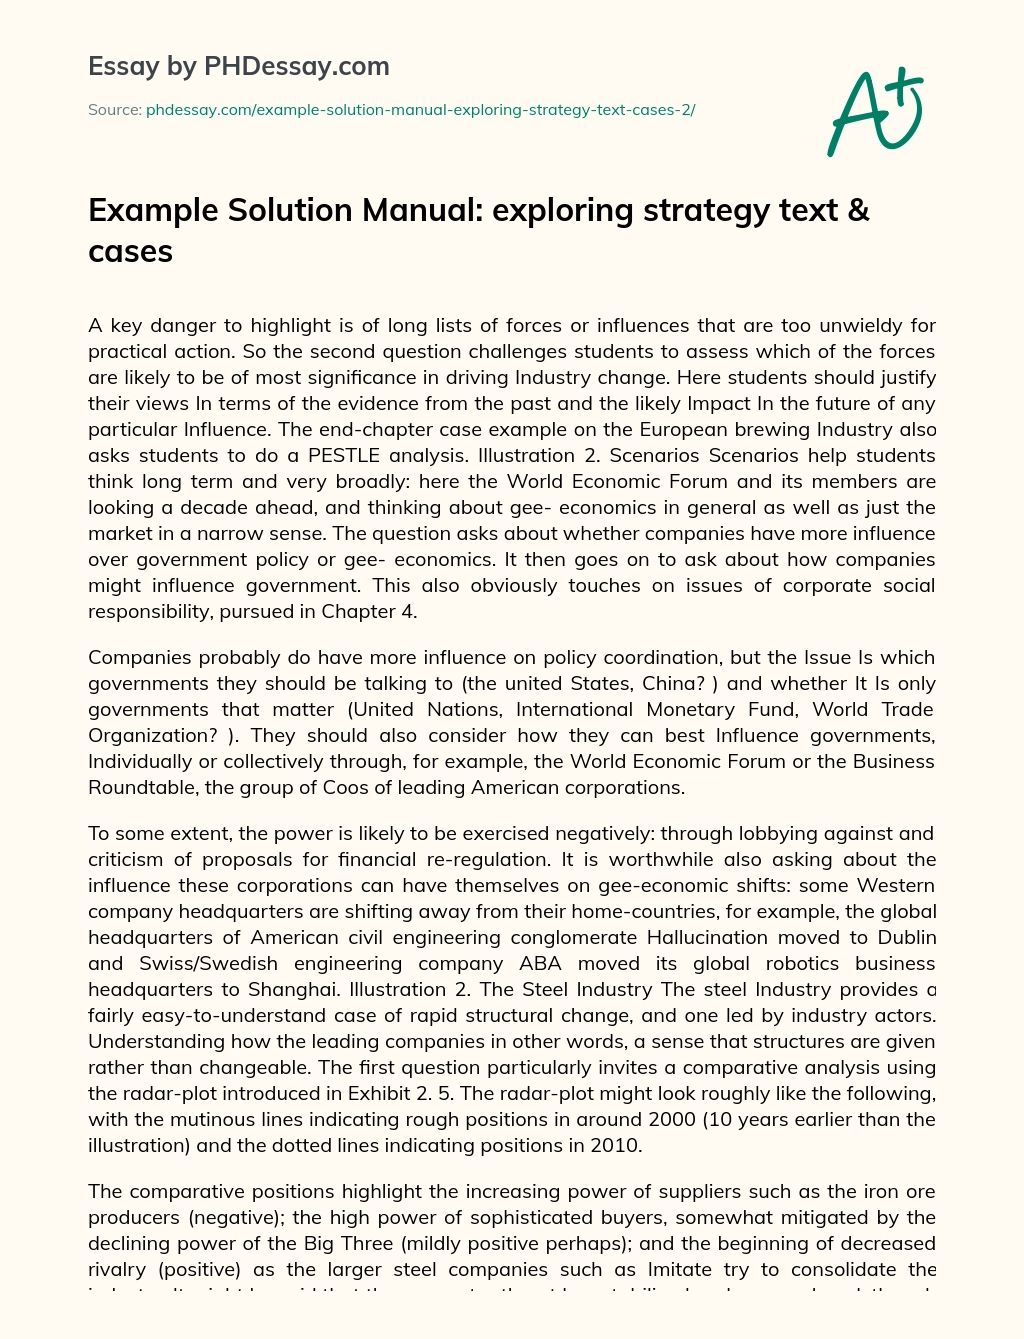 Example Solution Manual: exploring strategy text & cases essay